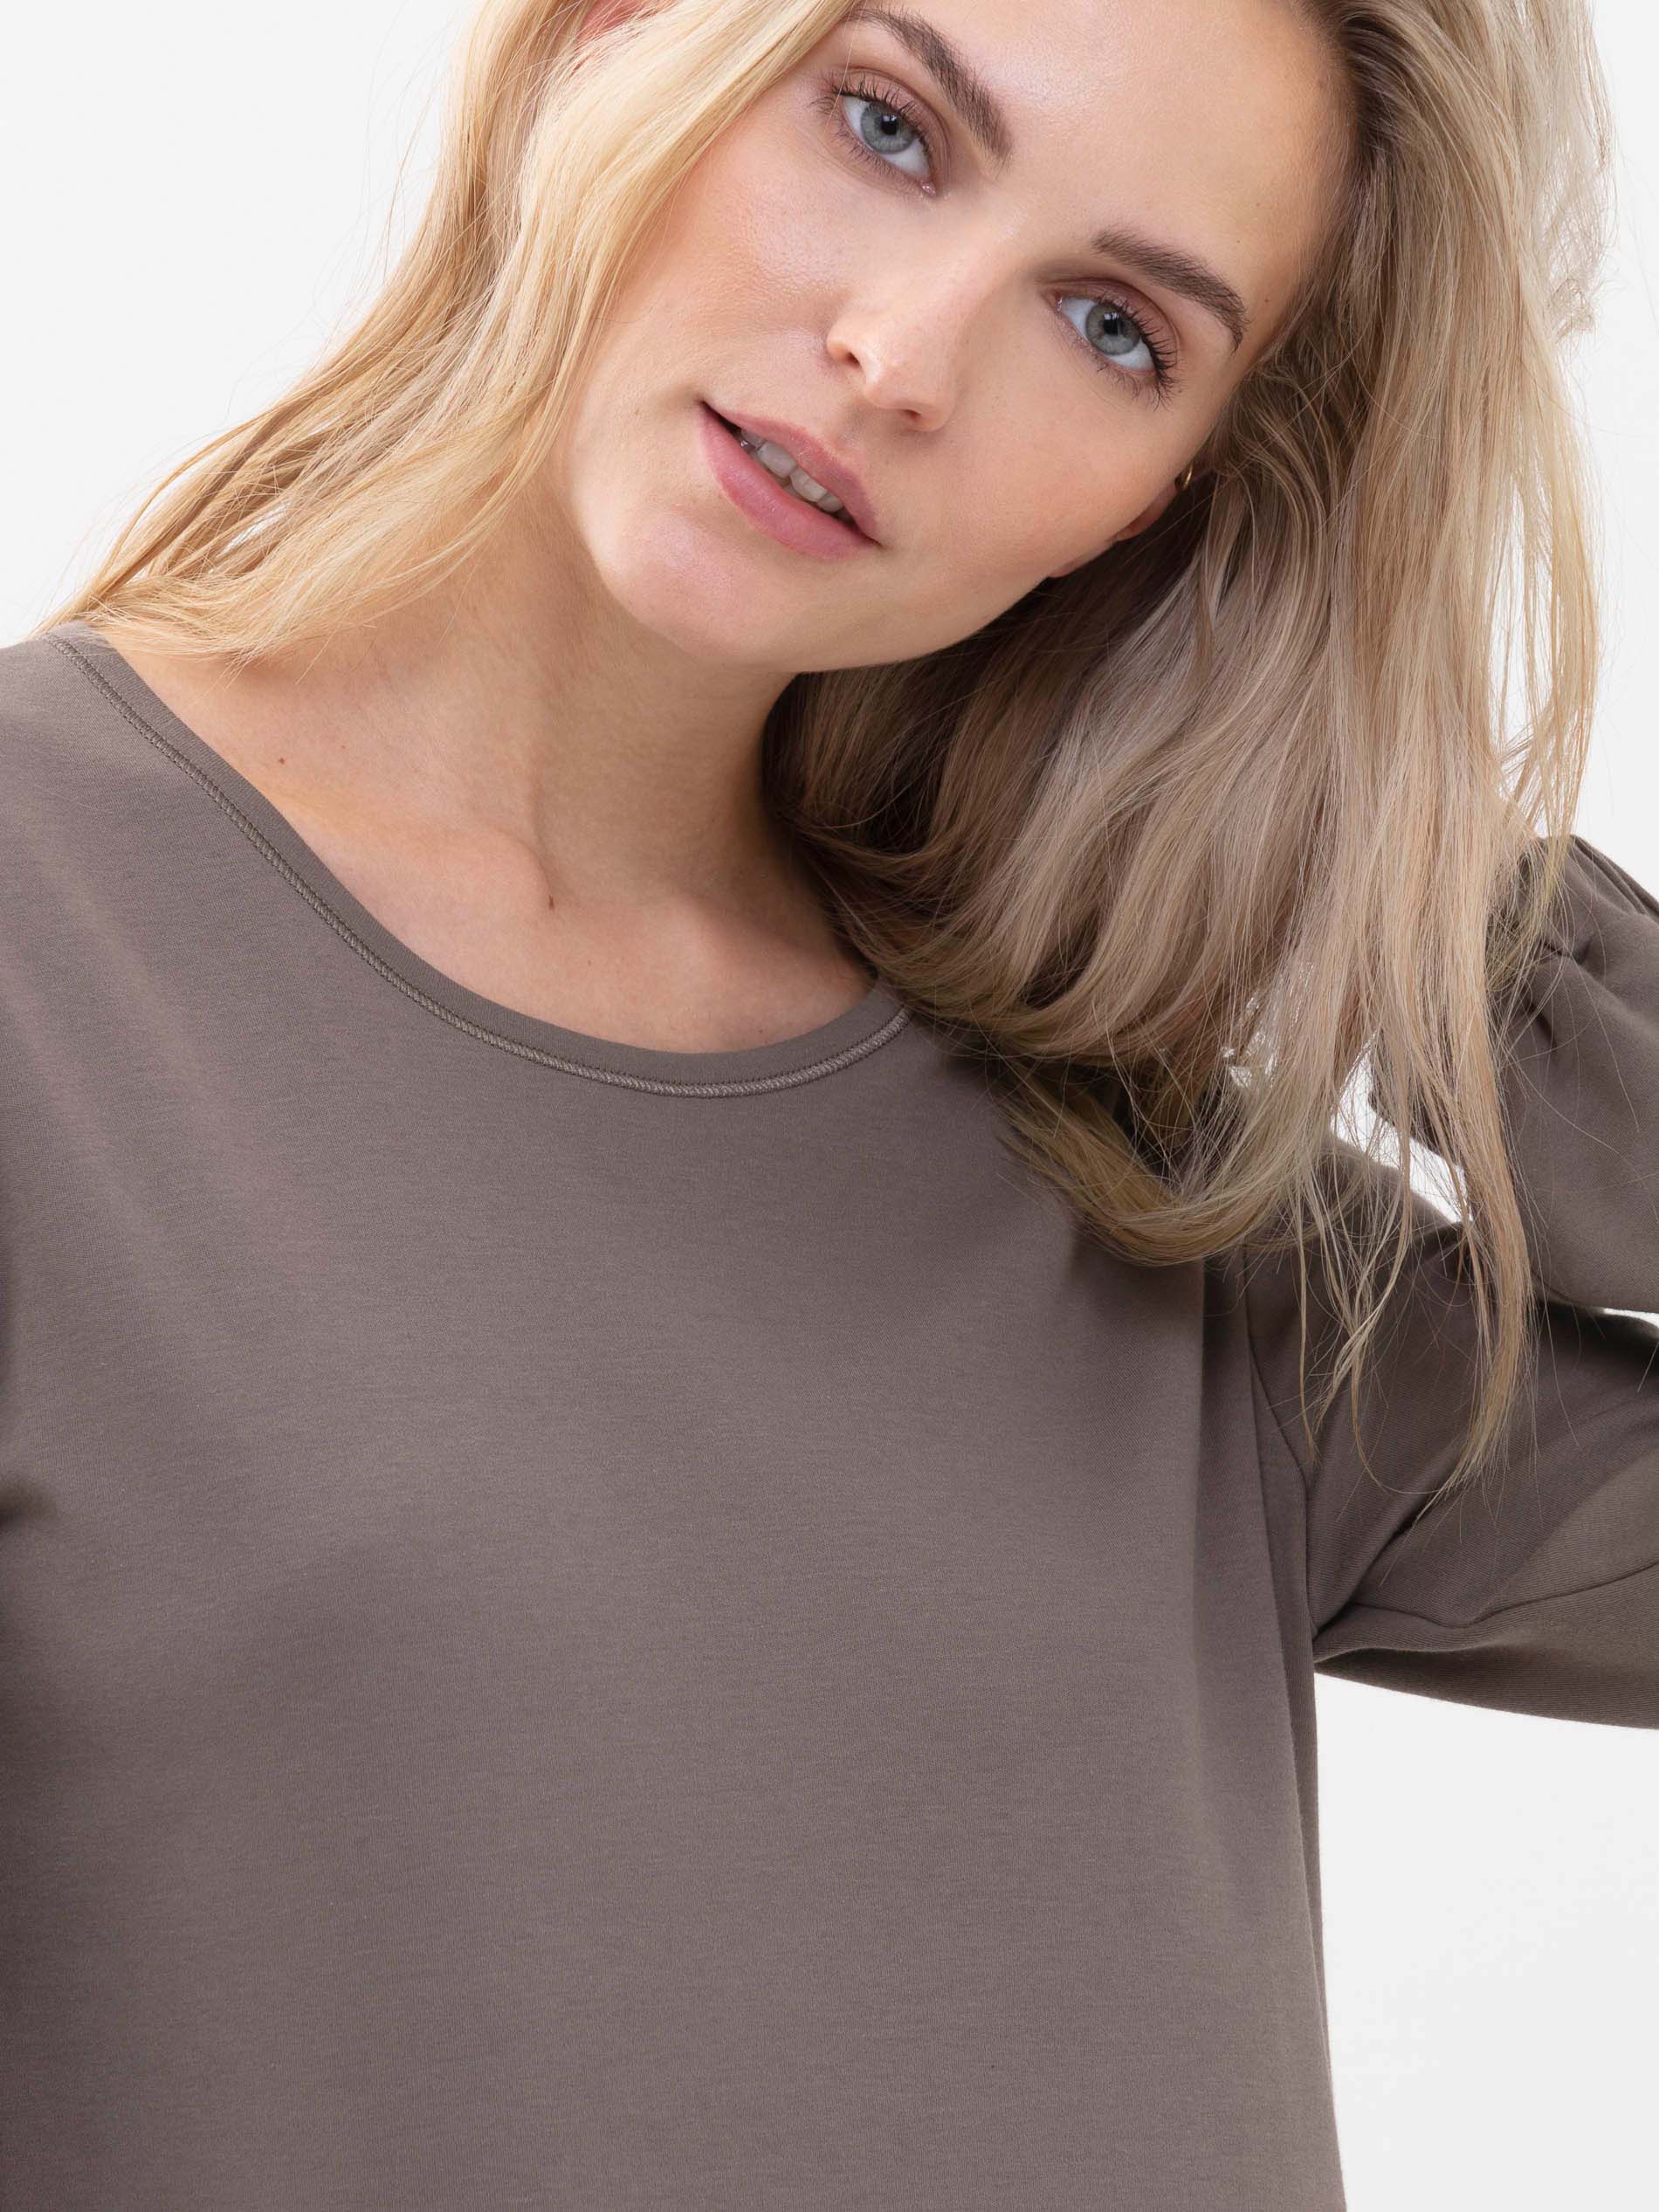 Front view of a blonde female model, wearing the long-sleeved shirt from the Zzzleepwear series in the colour Deep Taupe | mey®